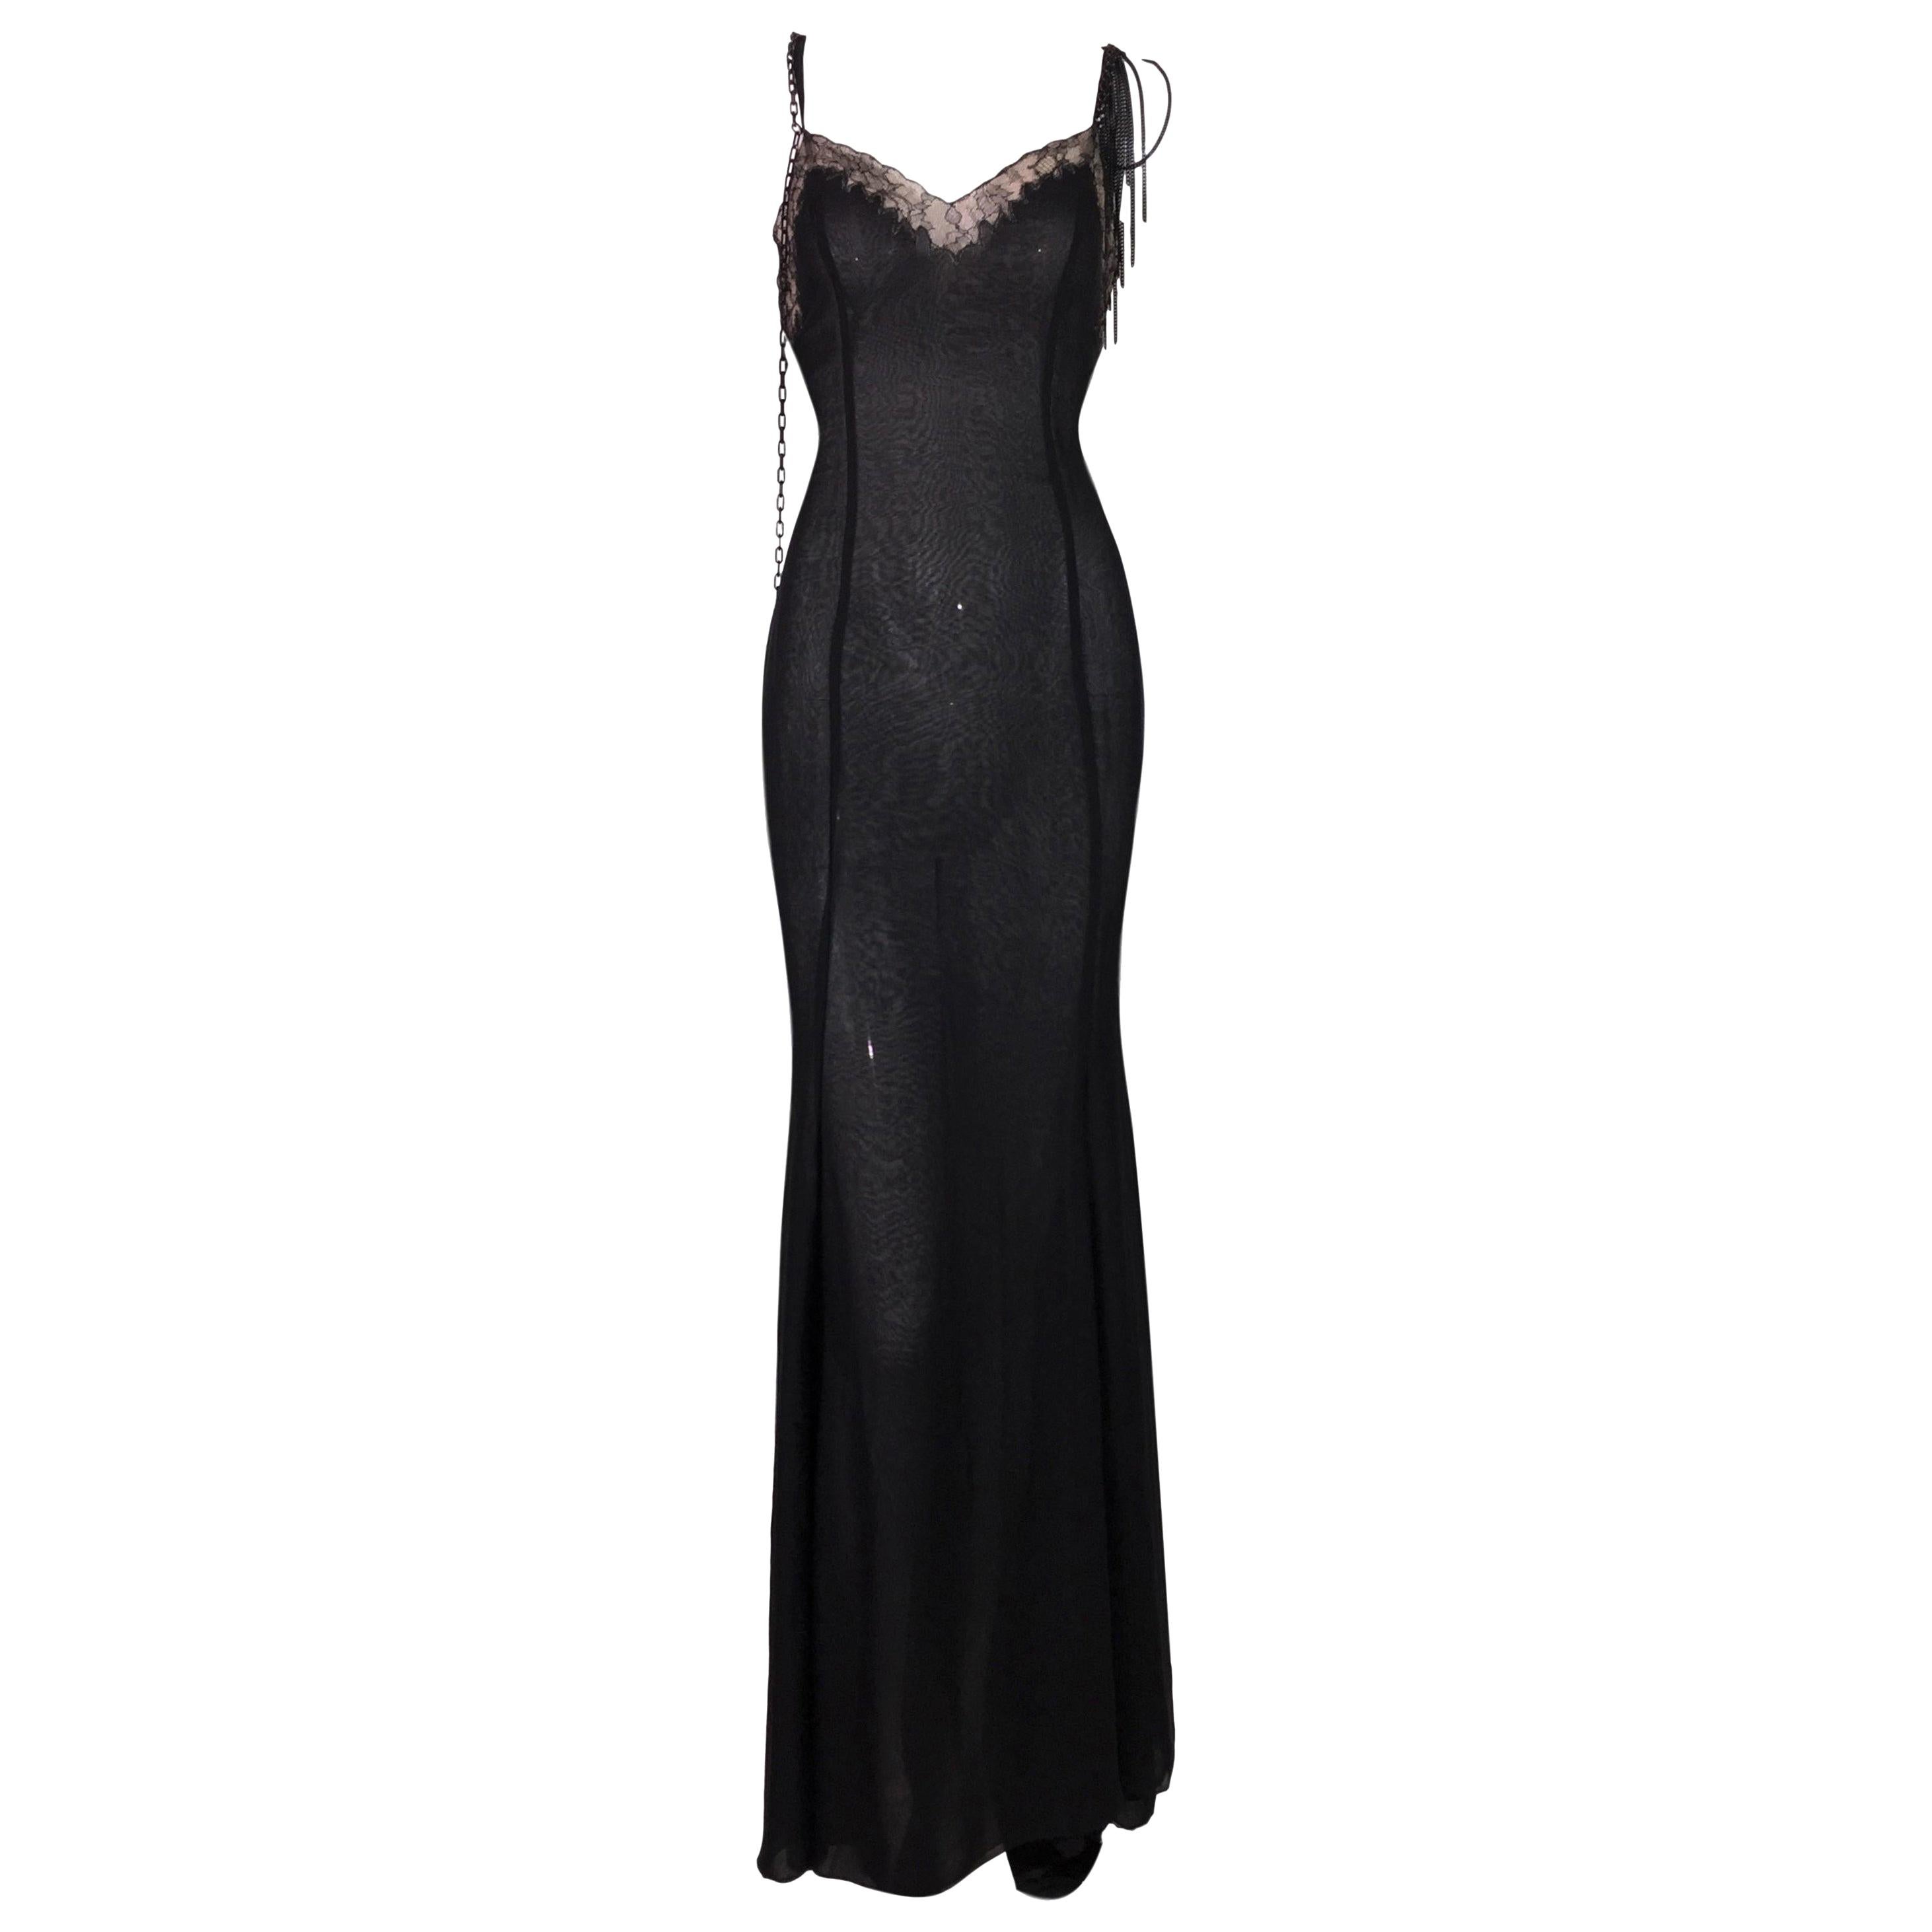 2004 Versace Black Sheer Plunging Chain Embellished Gown Dress w Train ...